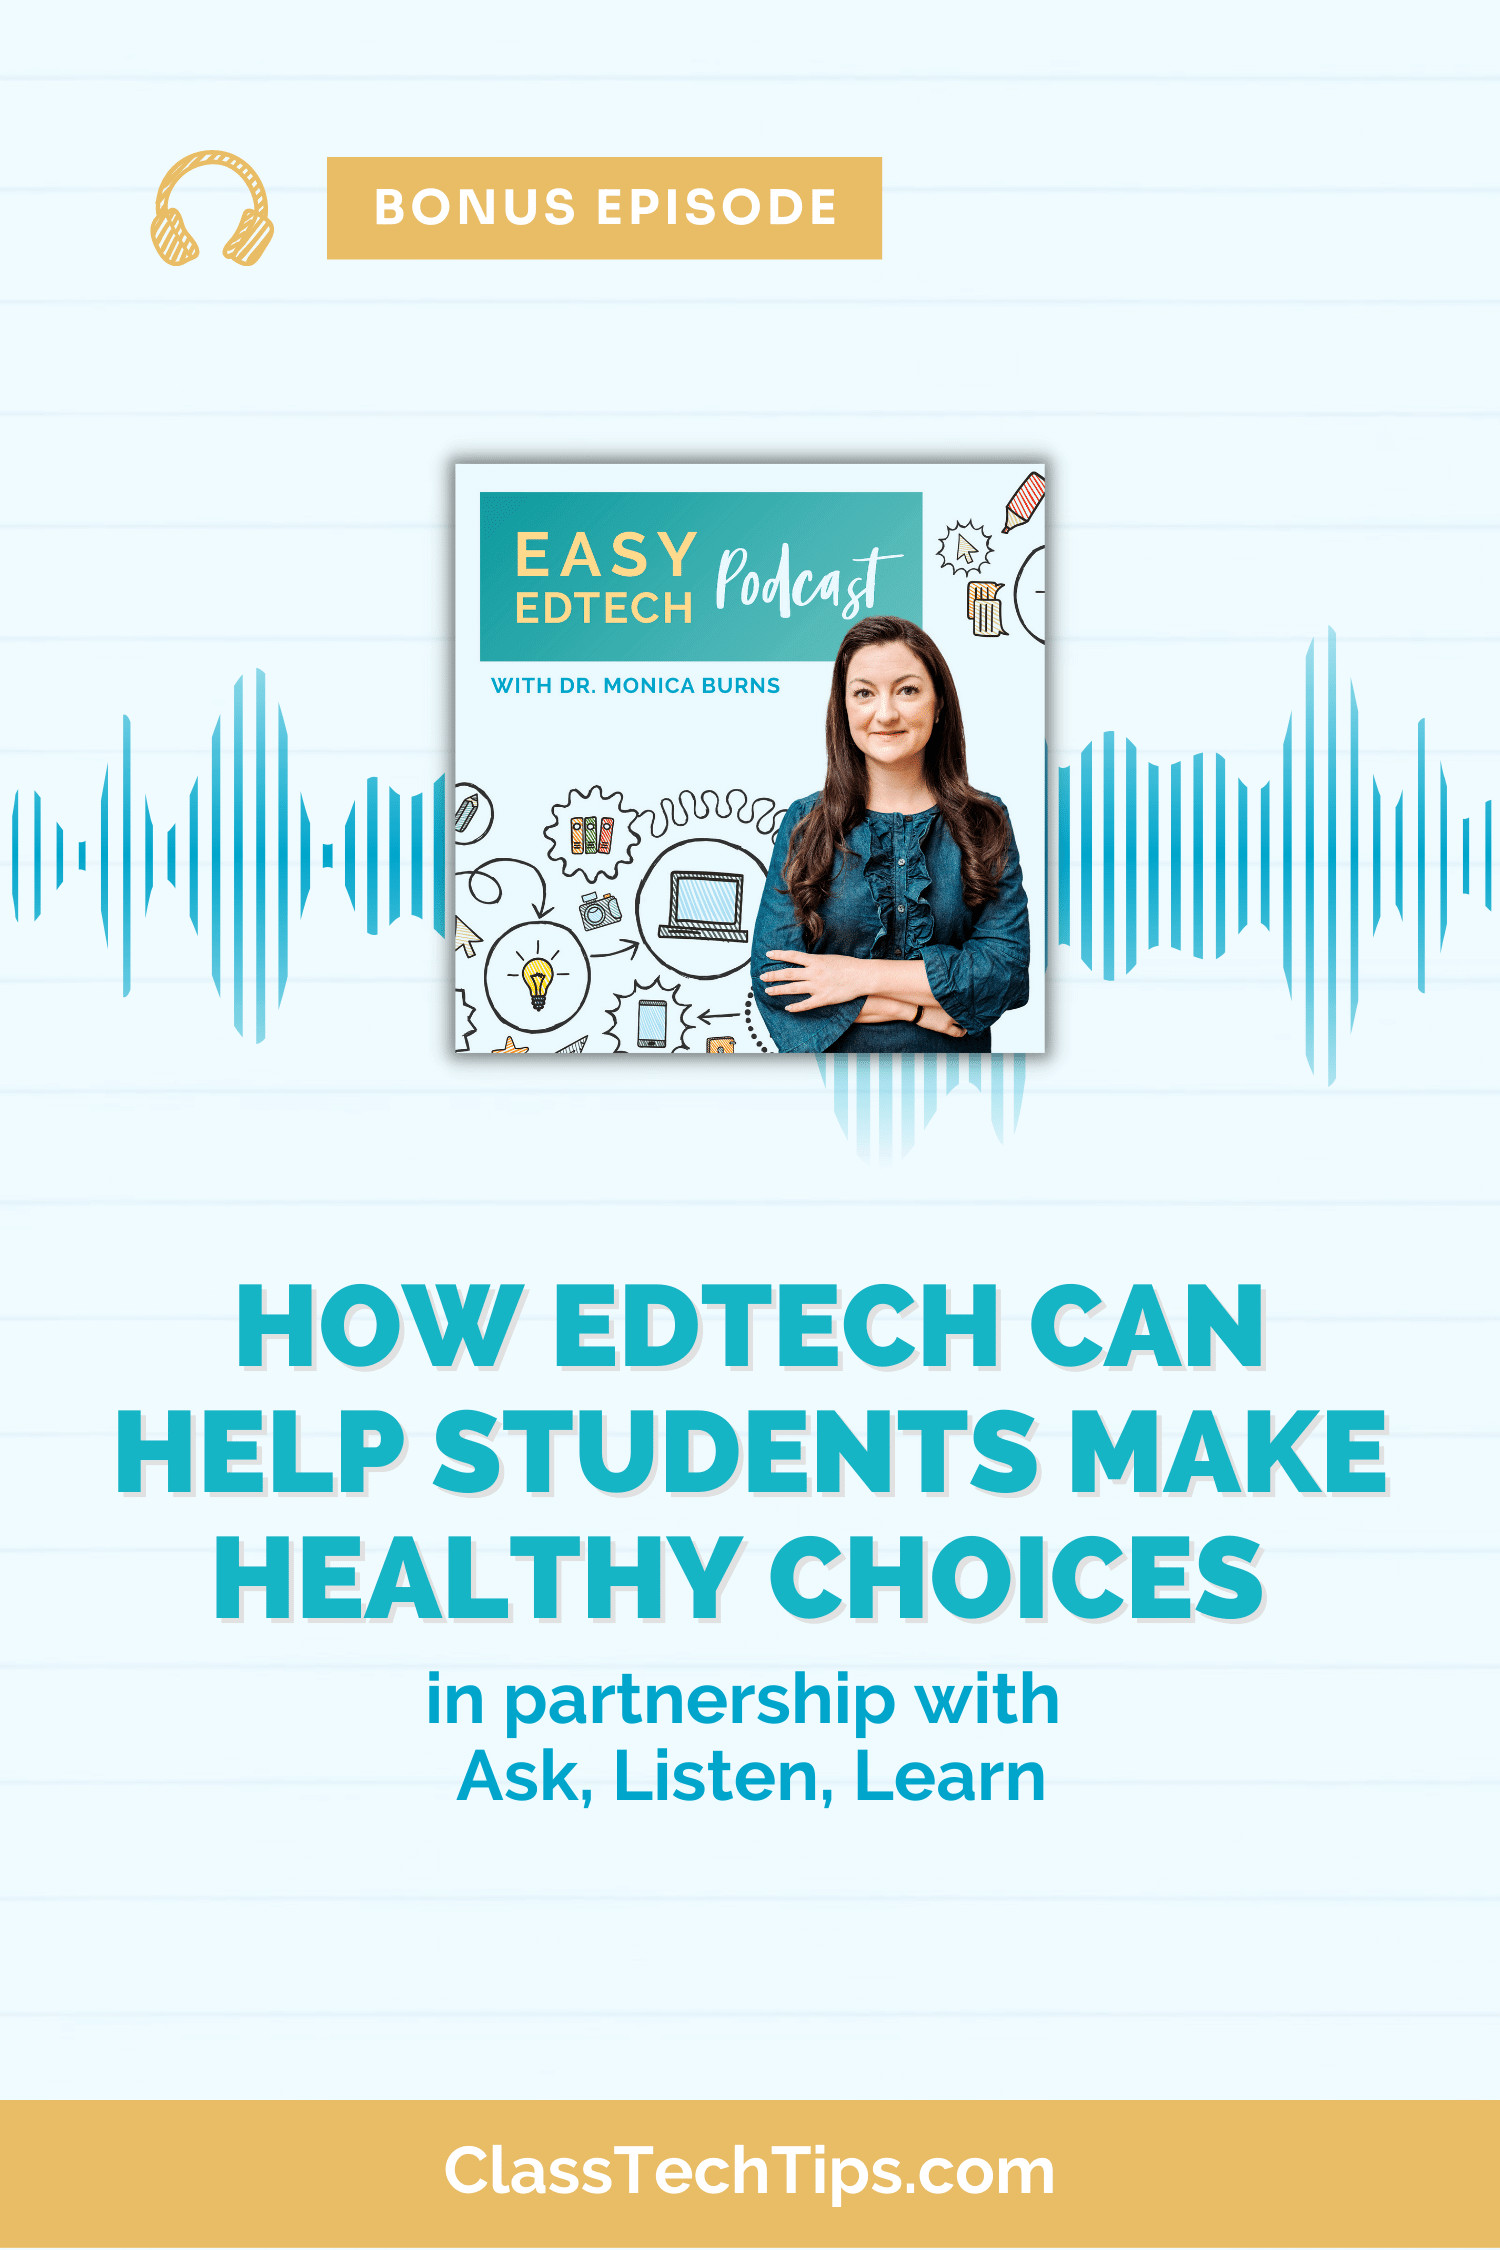 Eye-catching blog post image highlighting an insightful conversation with Leticia Barr on promoting healthy lifestyles and avoiding underage drinking through engaging digital resources and social-emotional learning